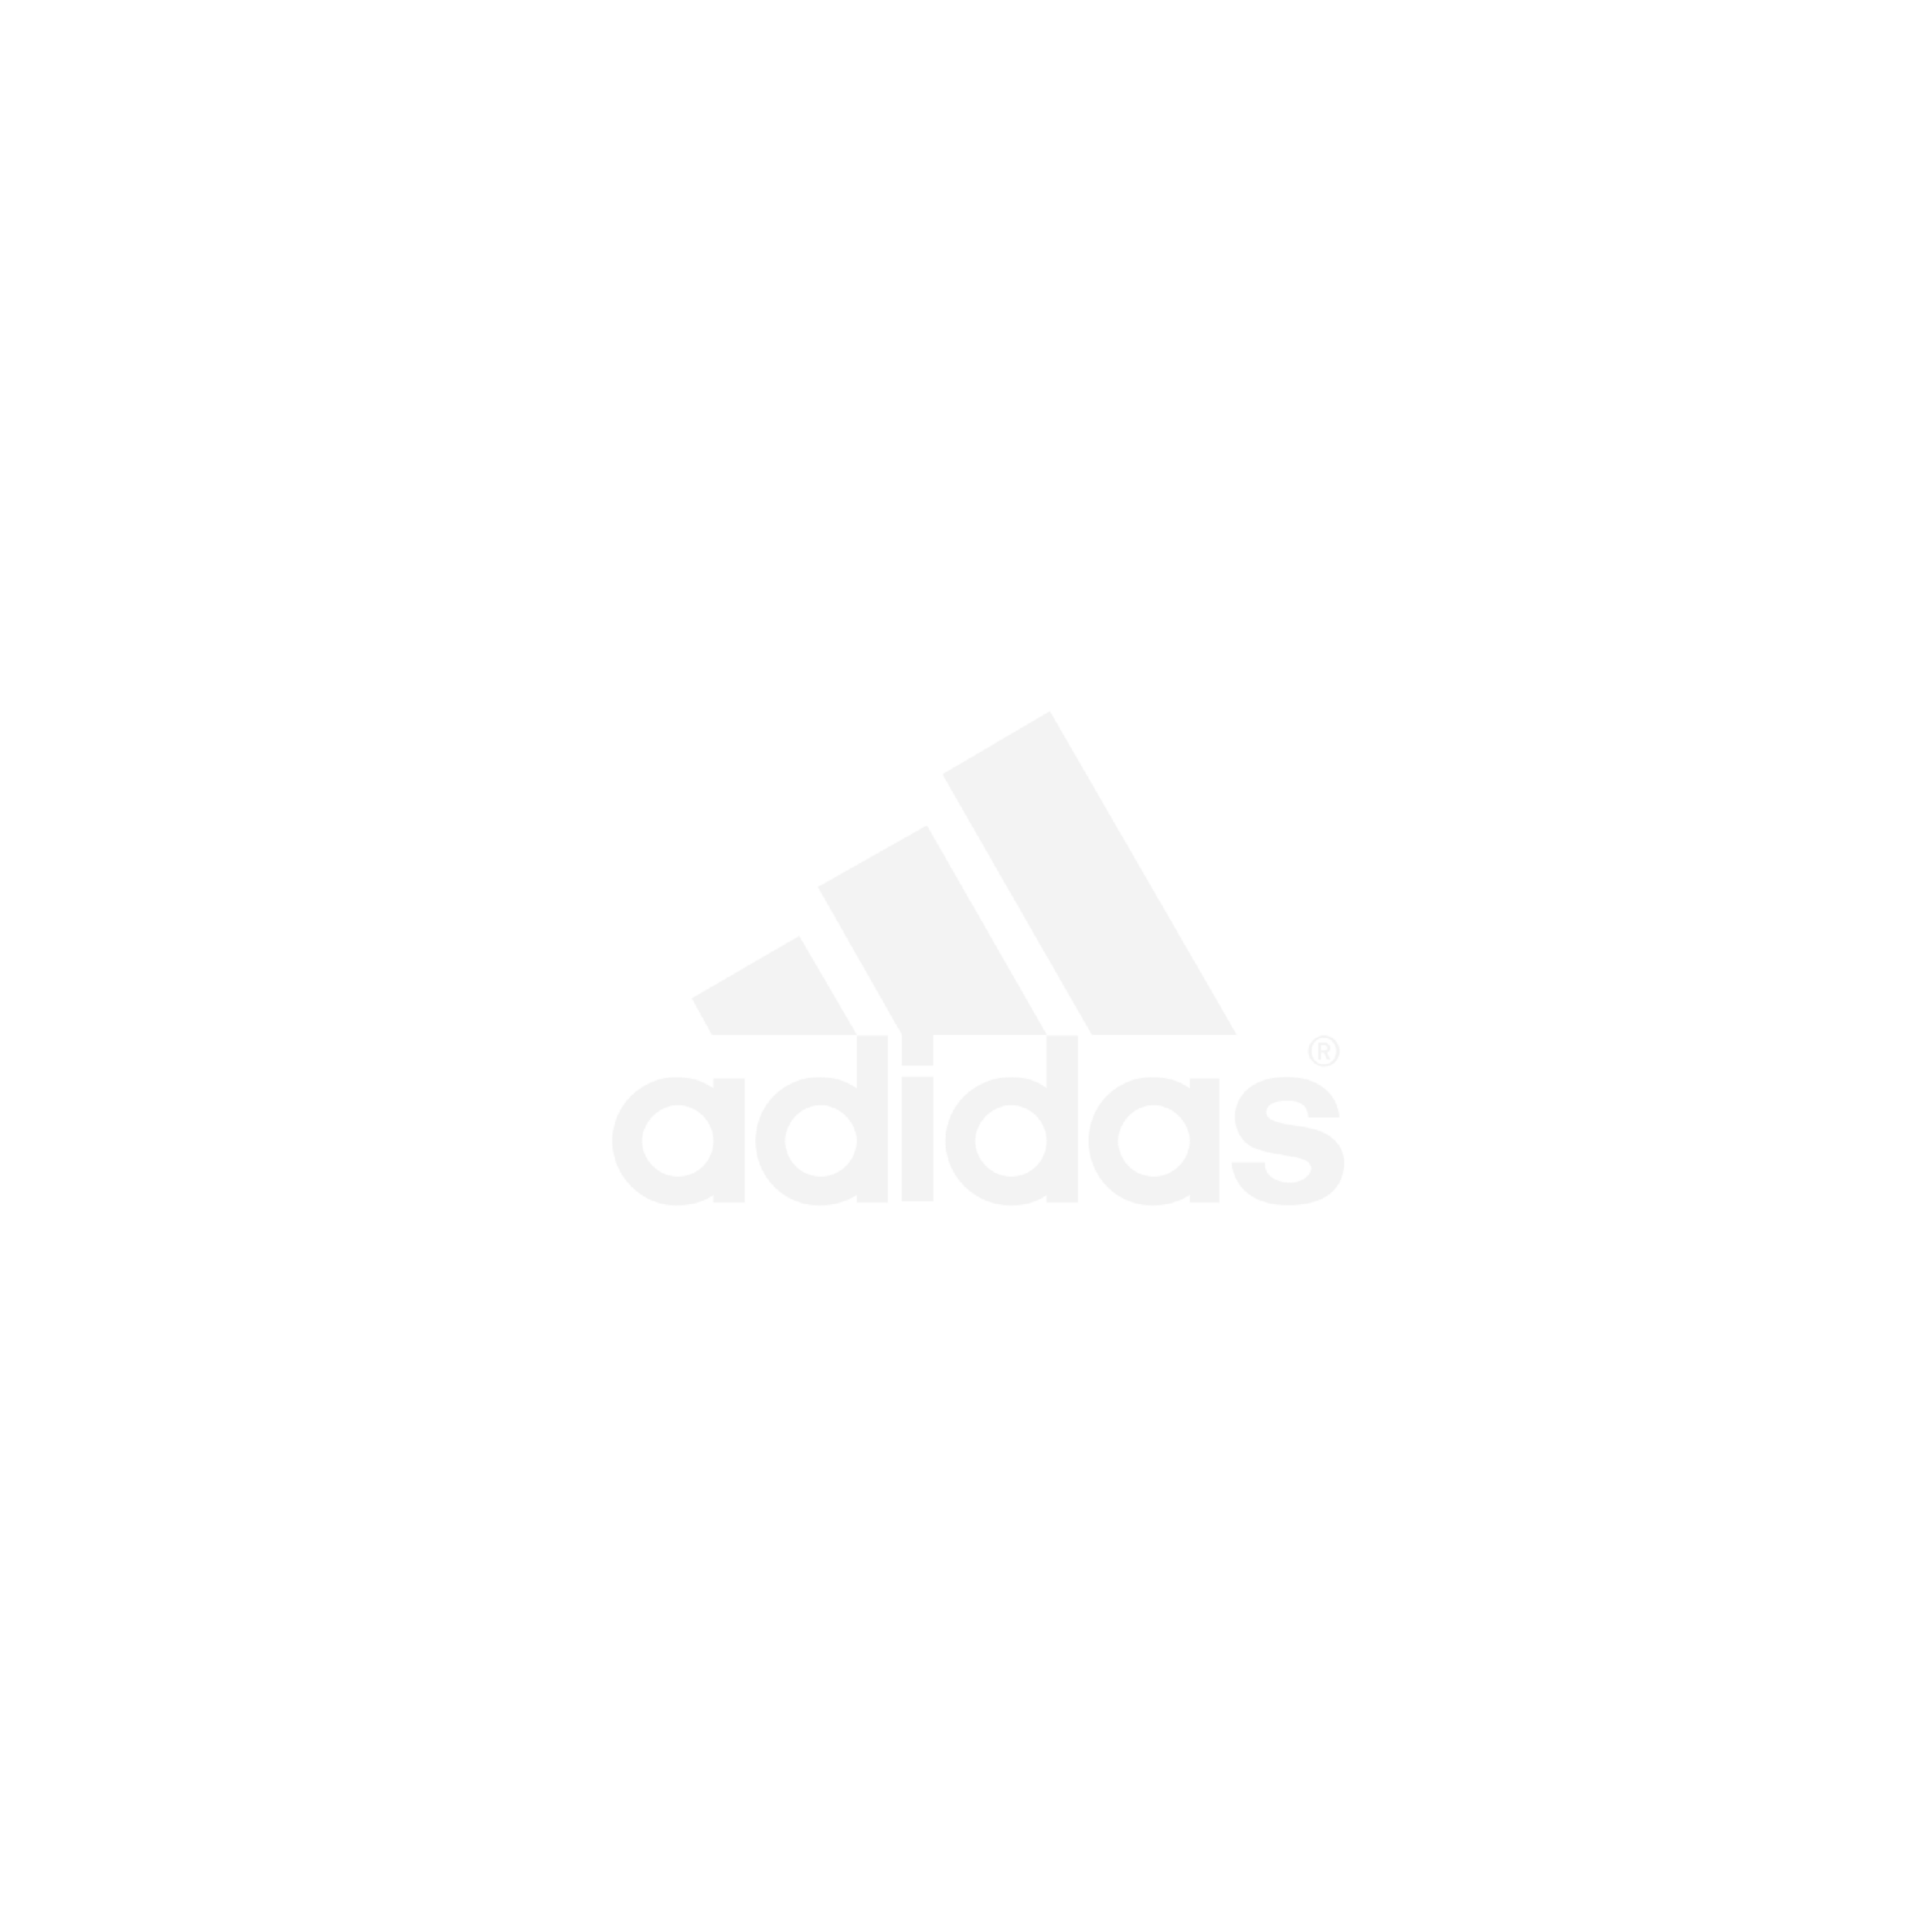 adidas-client-logo.png